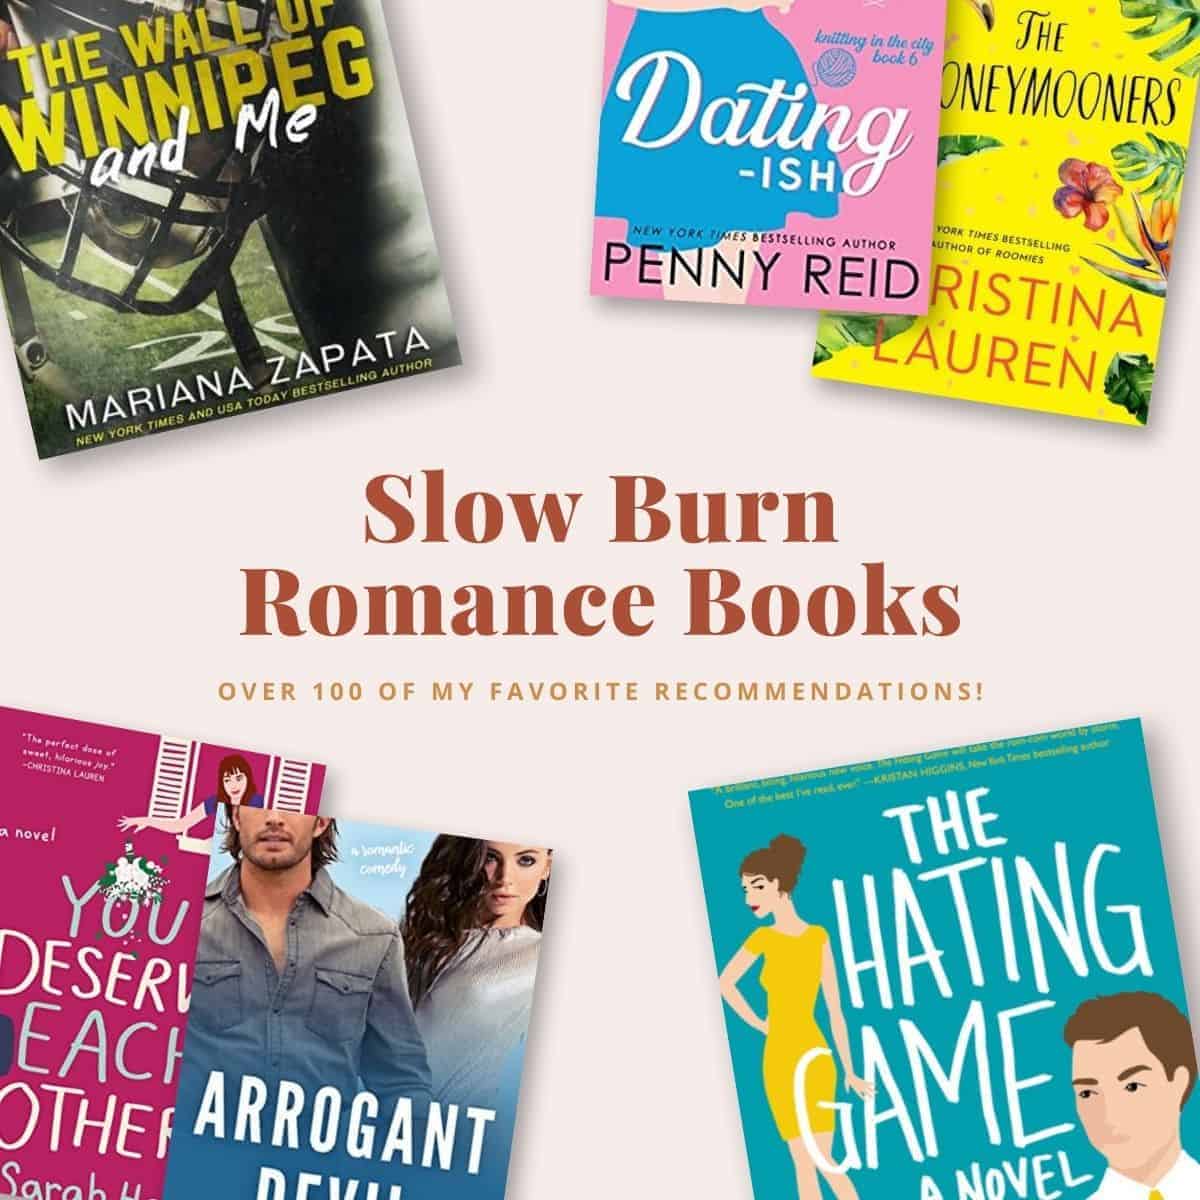 The Best Slow Burn Romance Books is a curated list of slow burn romance novel recommendations by book blogger Totally Bex